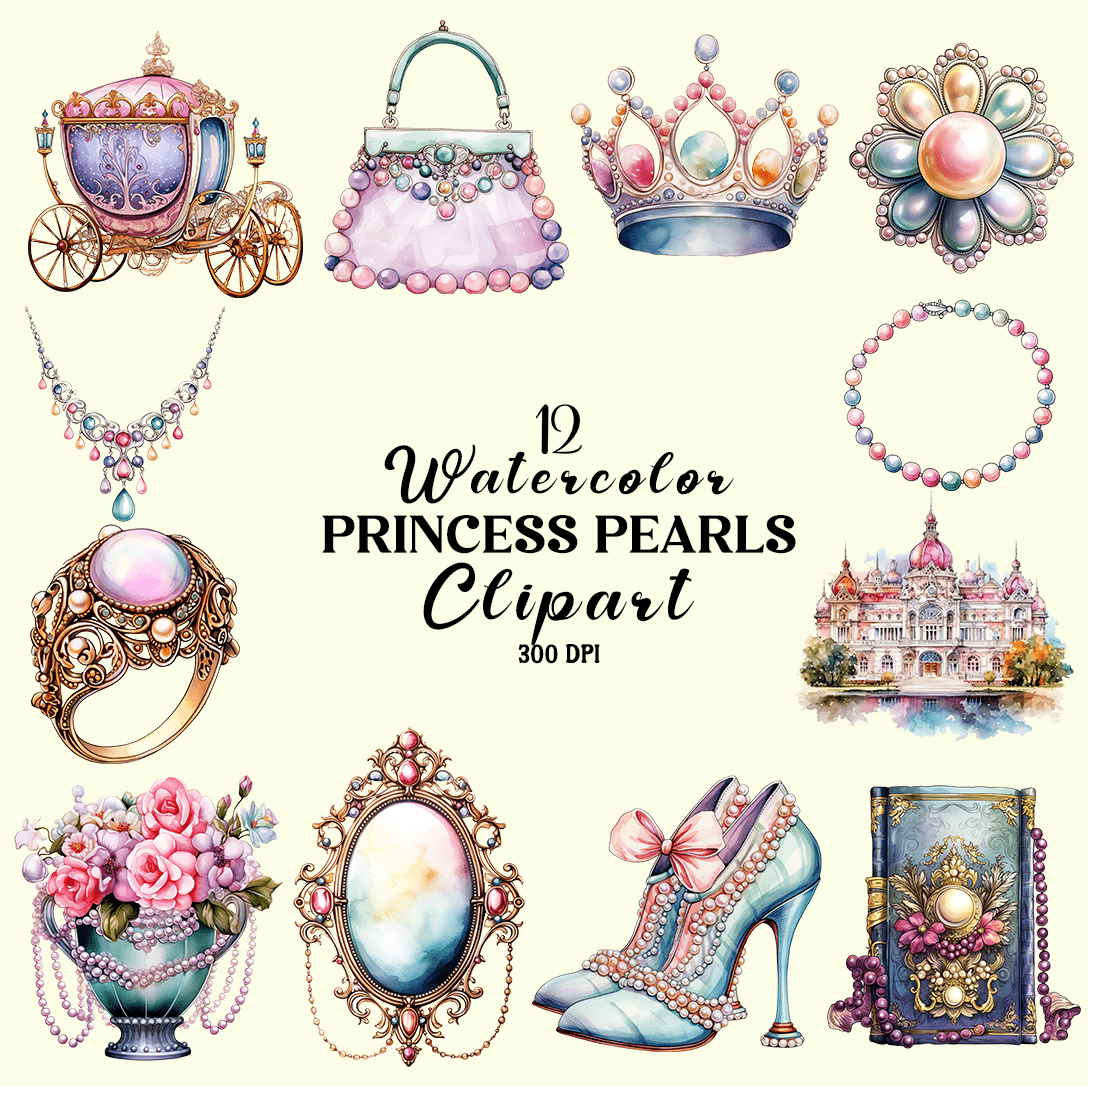 Watercolor Princess Pearls Clipart cover image.